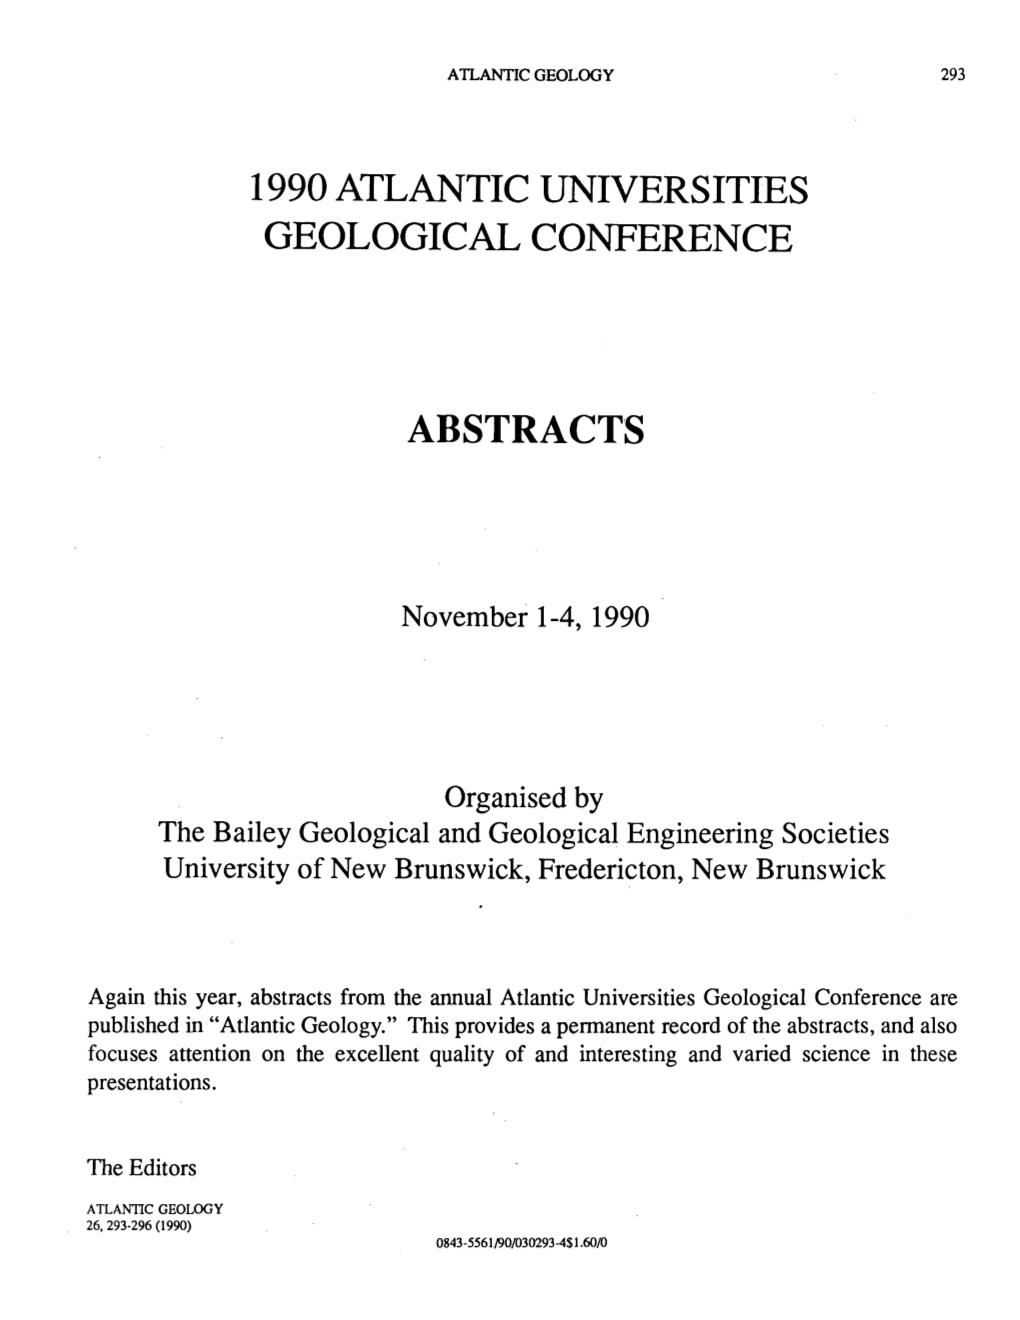 1990 Atlantic Universities Geological Conference